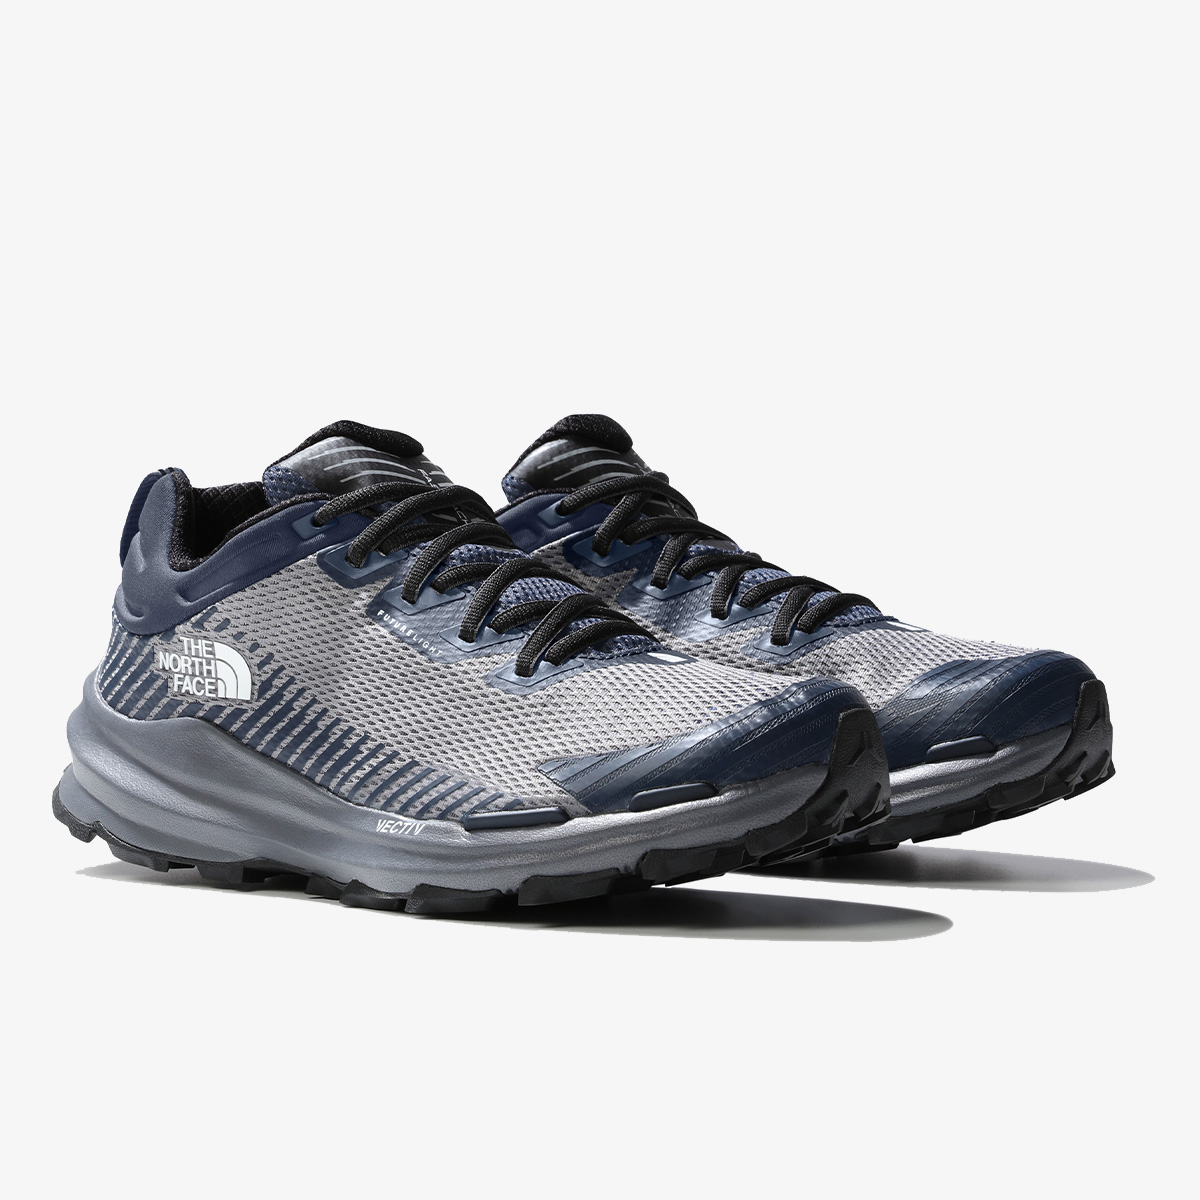 The North Face M VECTIV FASTPACK FUTURELIGHT MELD GREY/ 